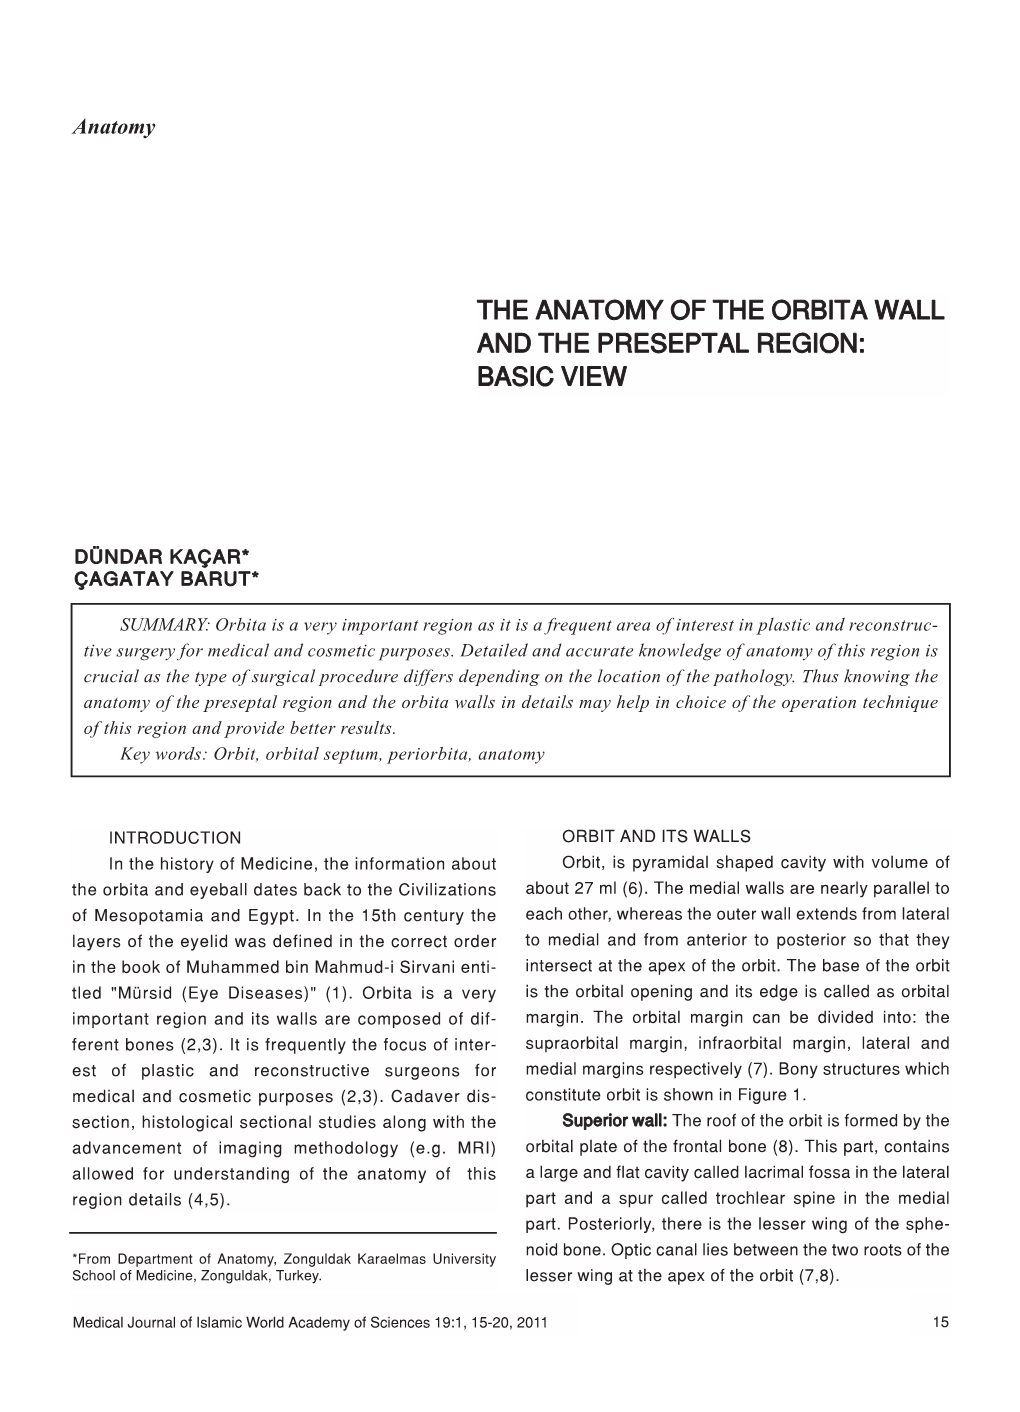 The Anatomy of the Orbita Wall and the Preseptal Region: Basic View